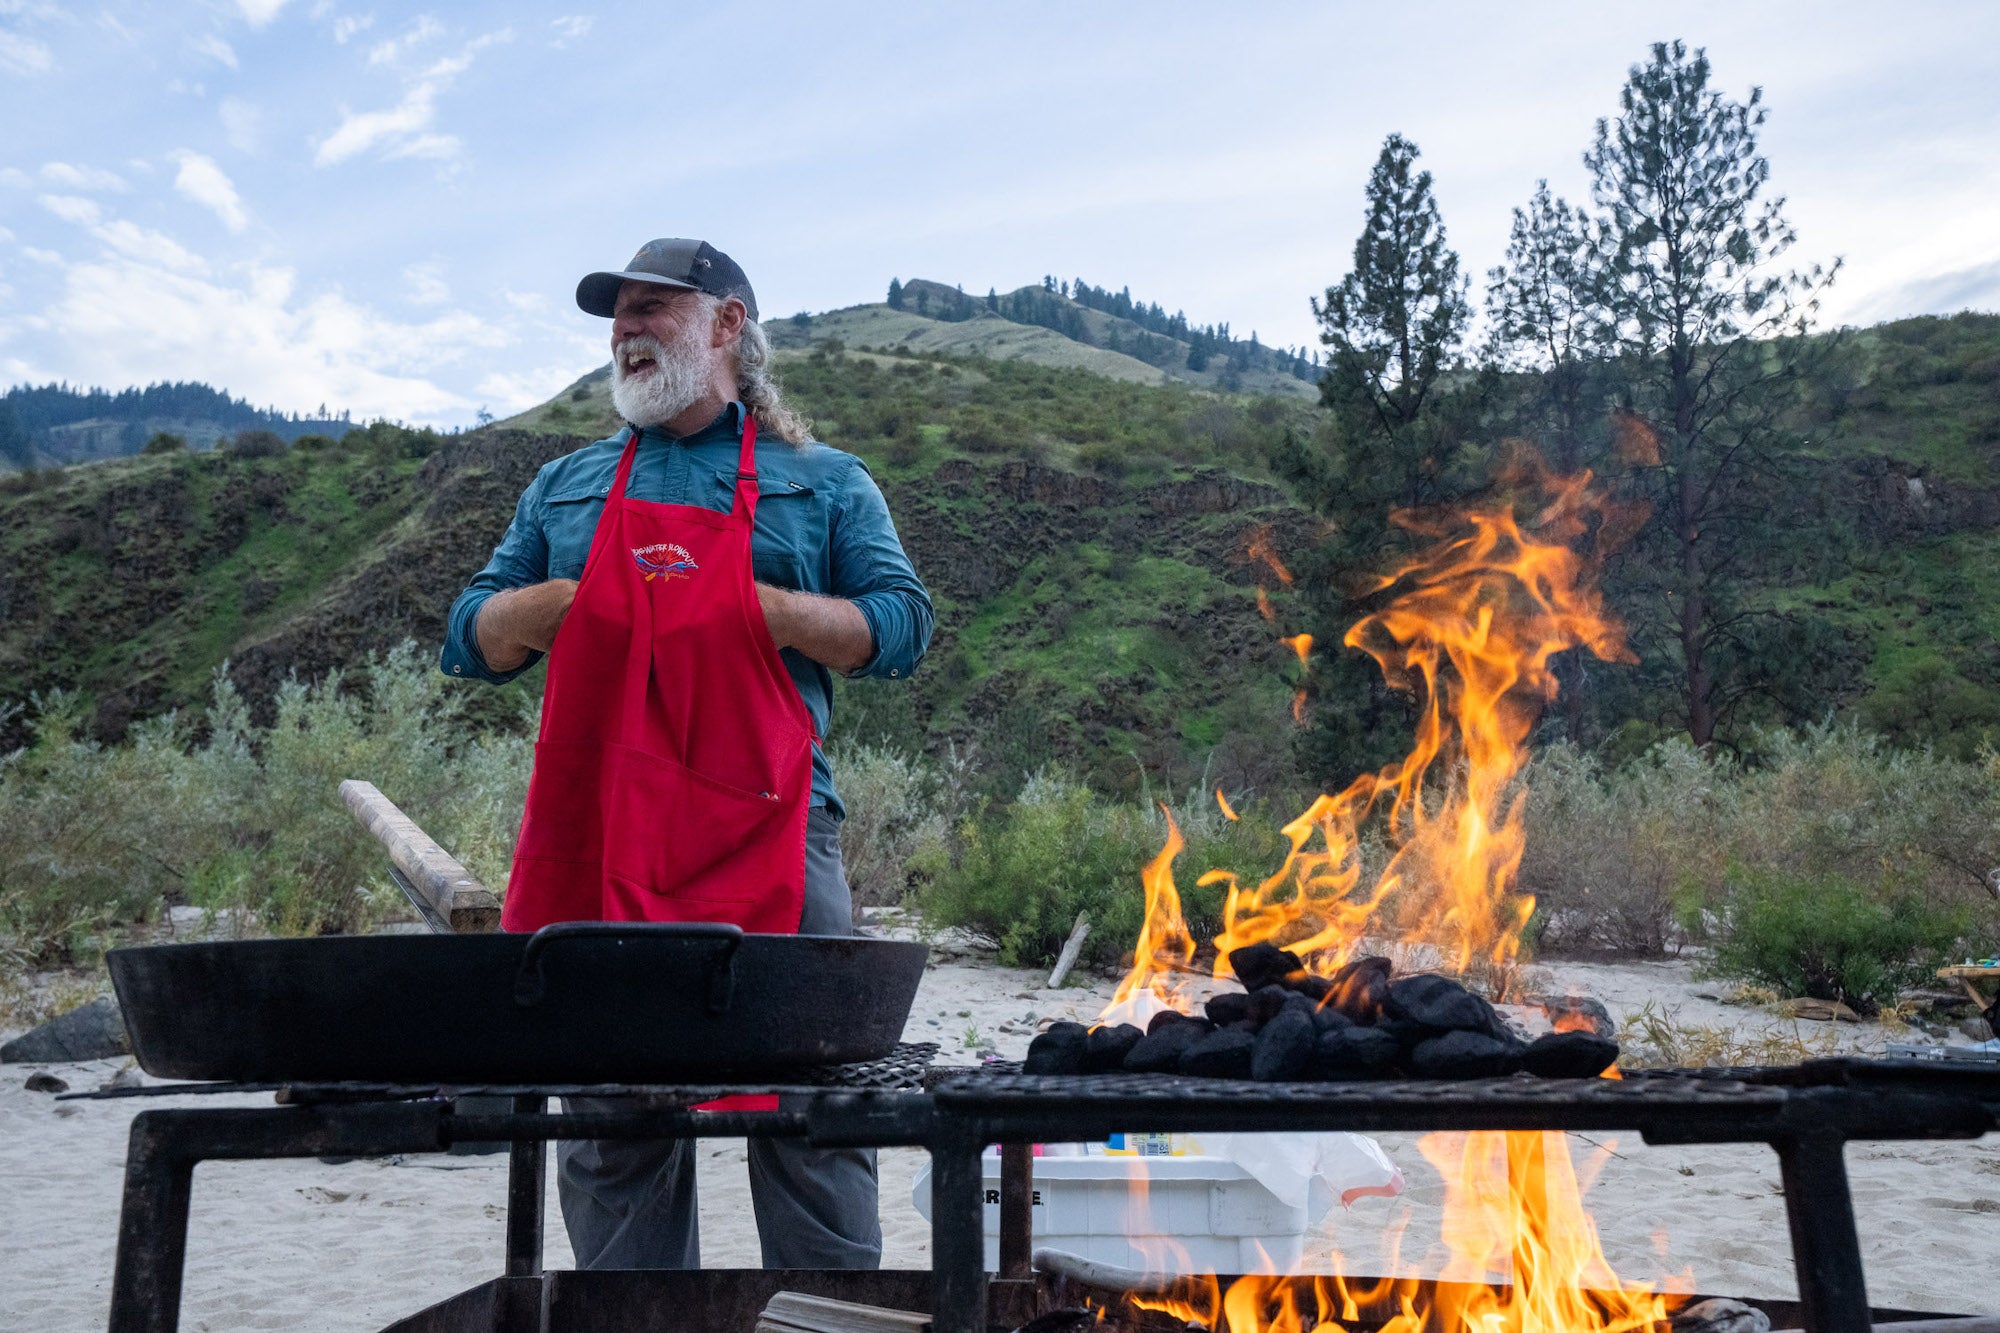 The owner of Rapid River Outfitters and the leader of our trip, Roy Akins cooks dinner over an open fire.